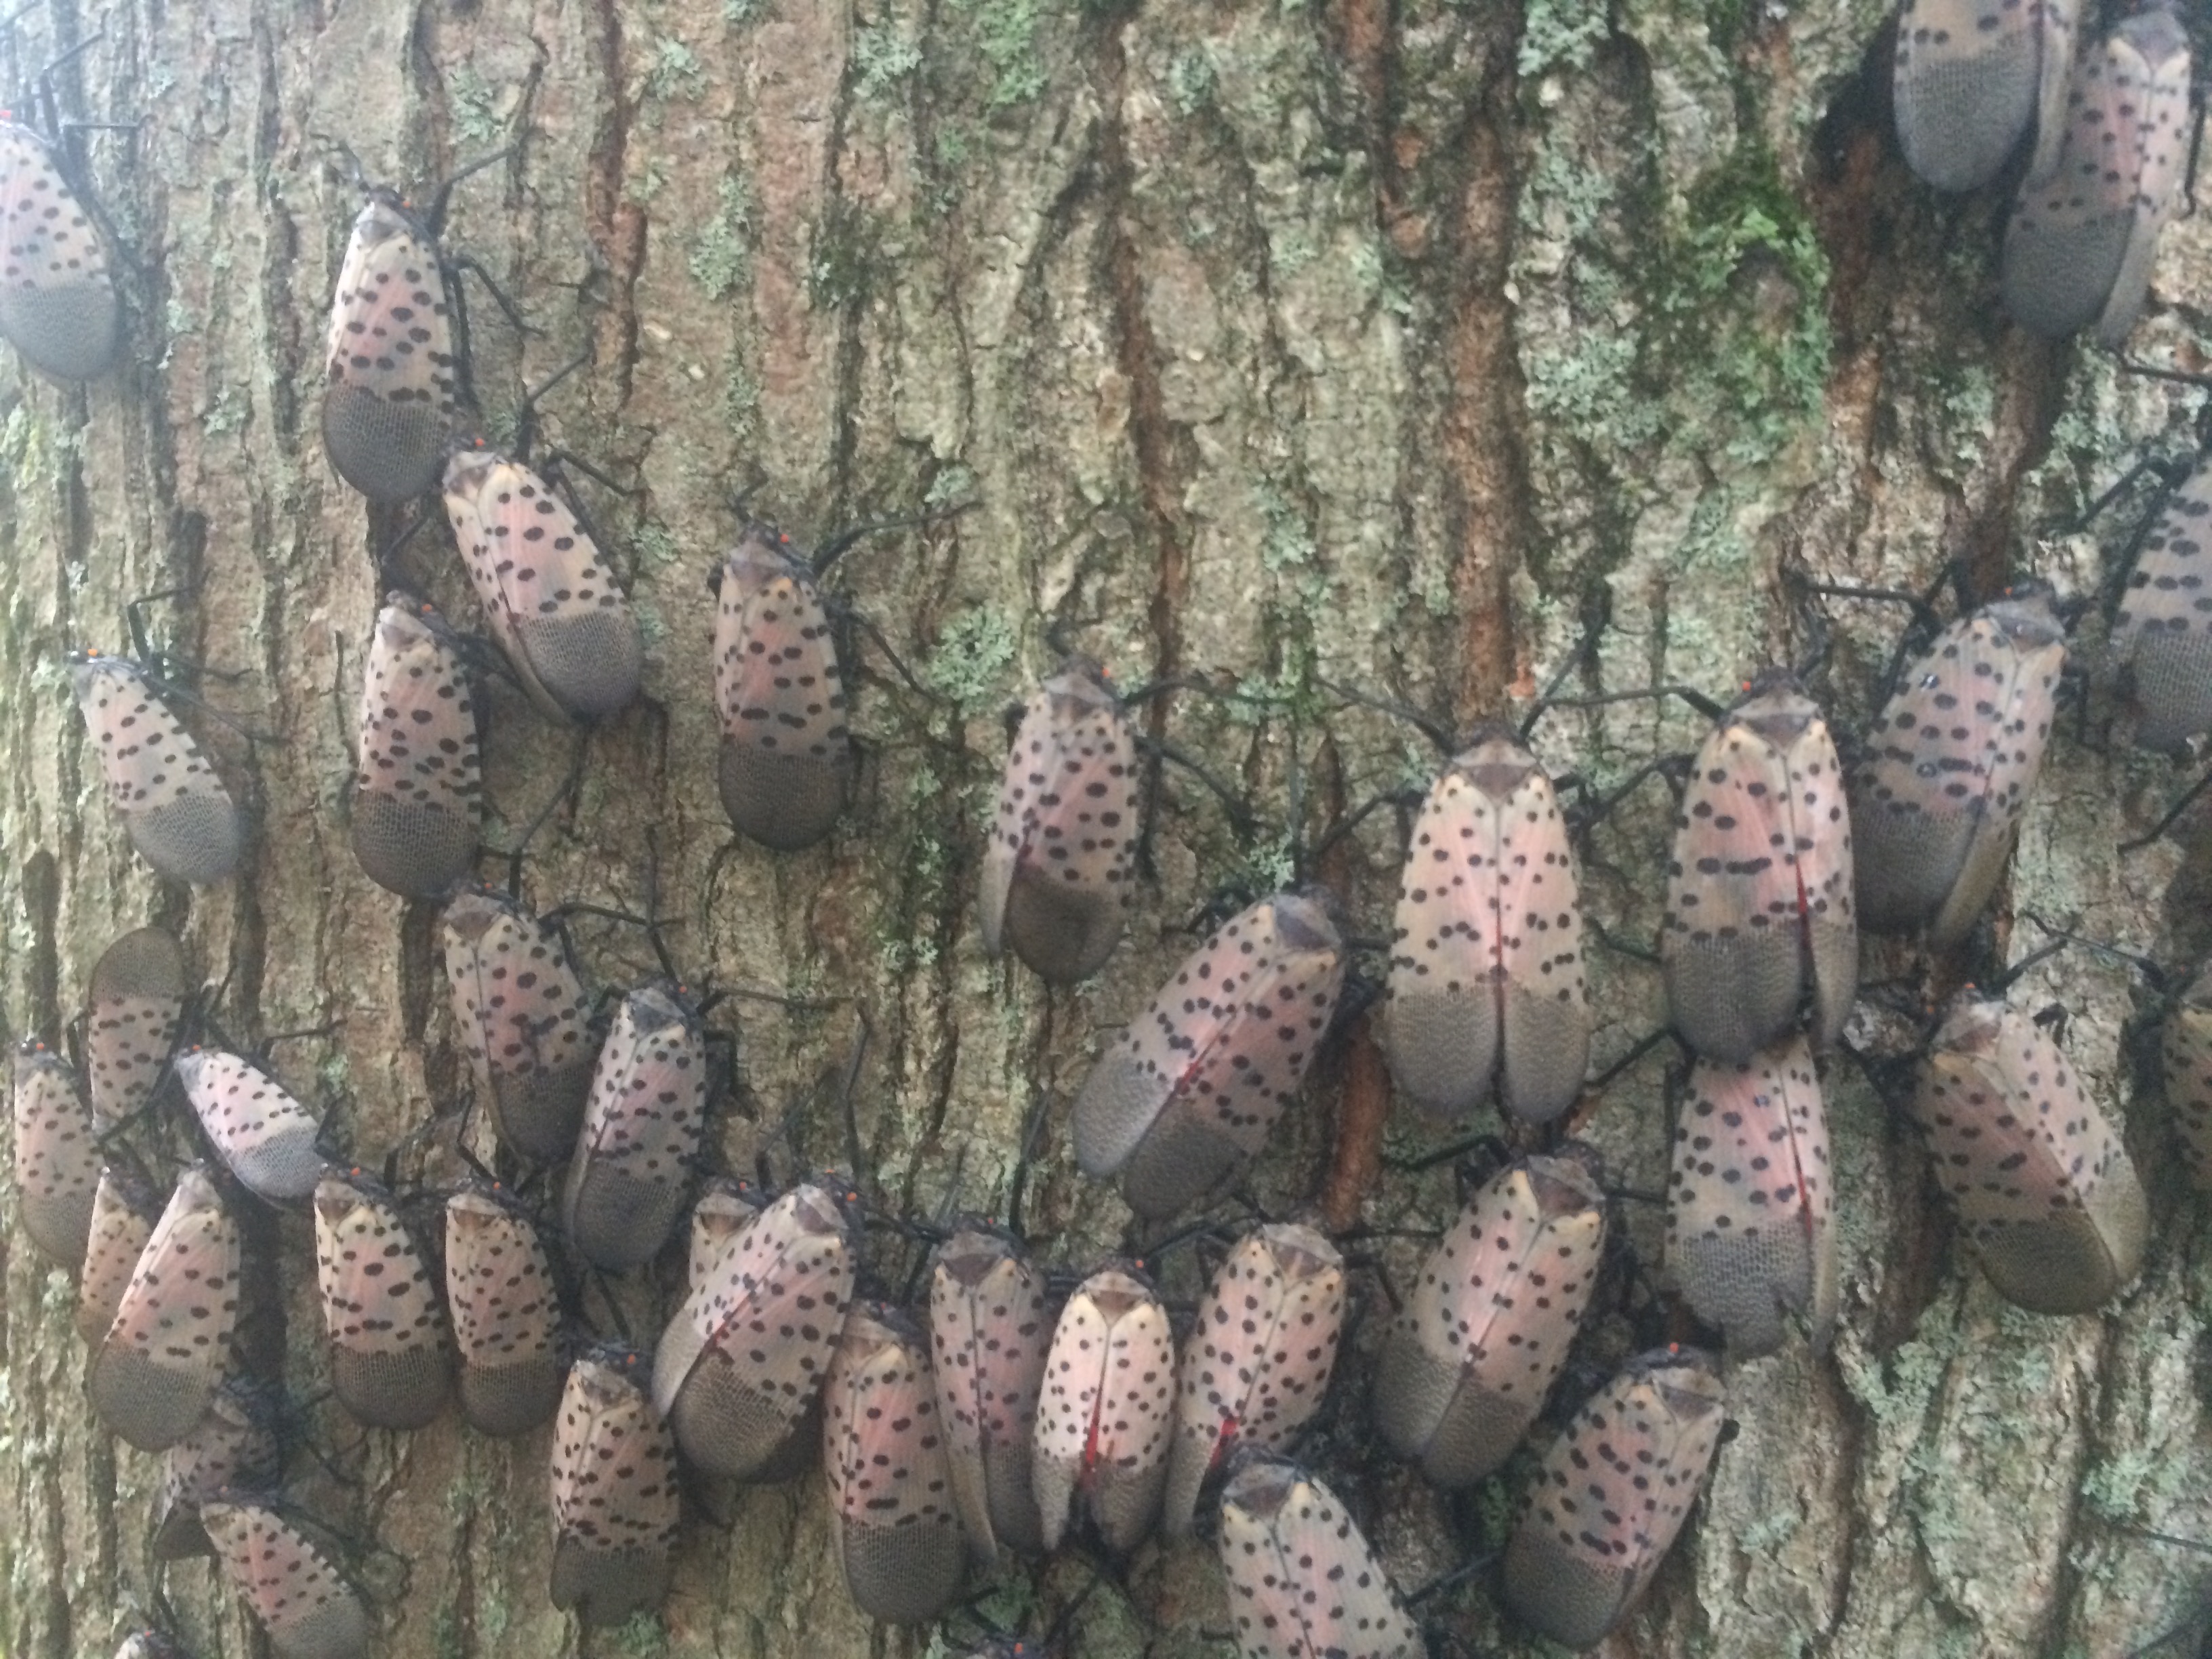 Spotted lanternfly 9